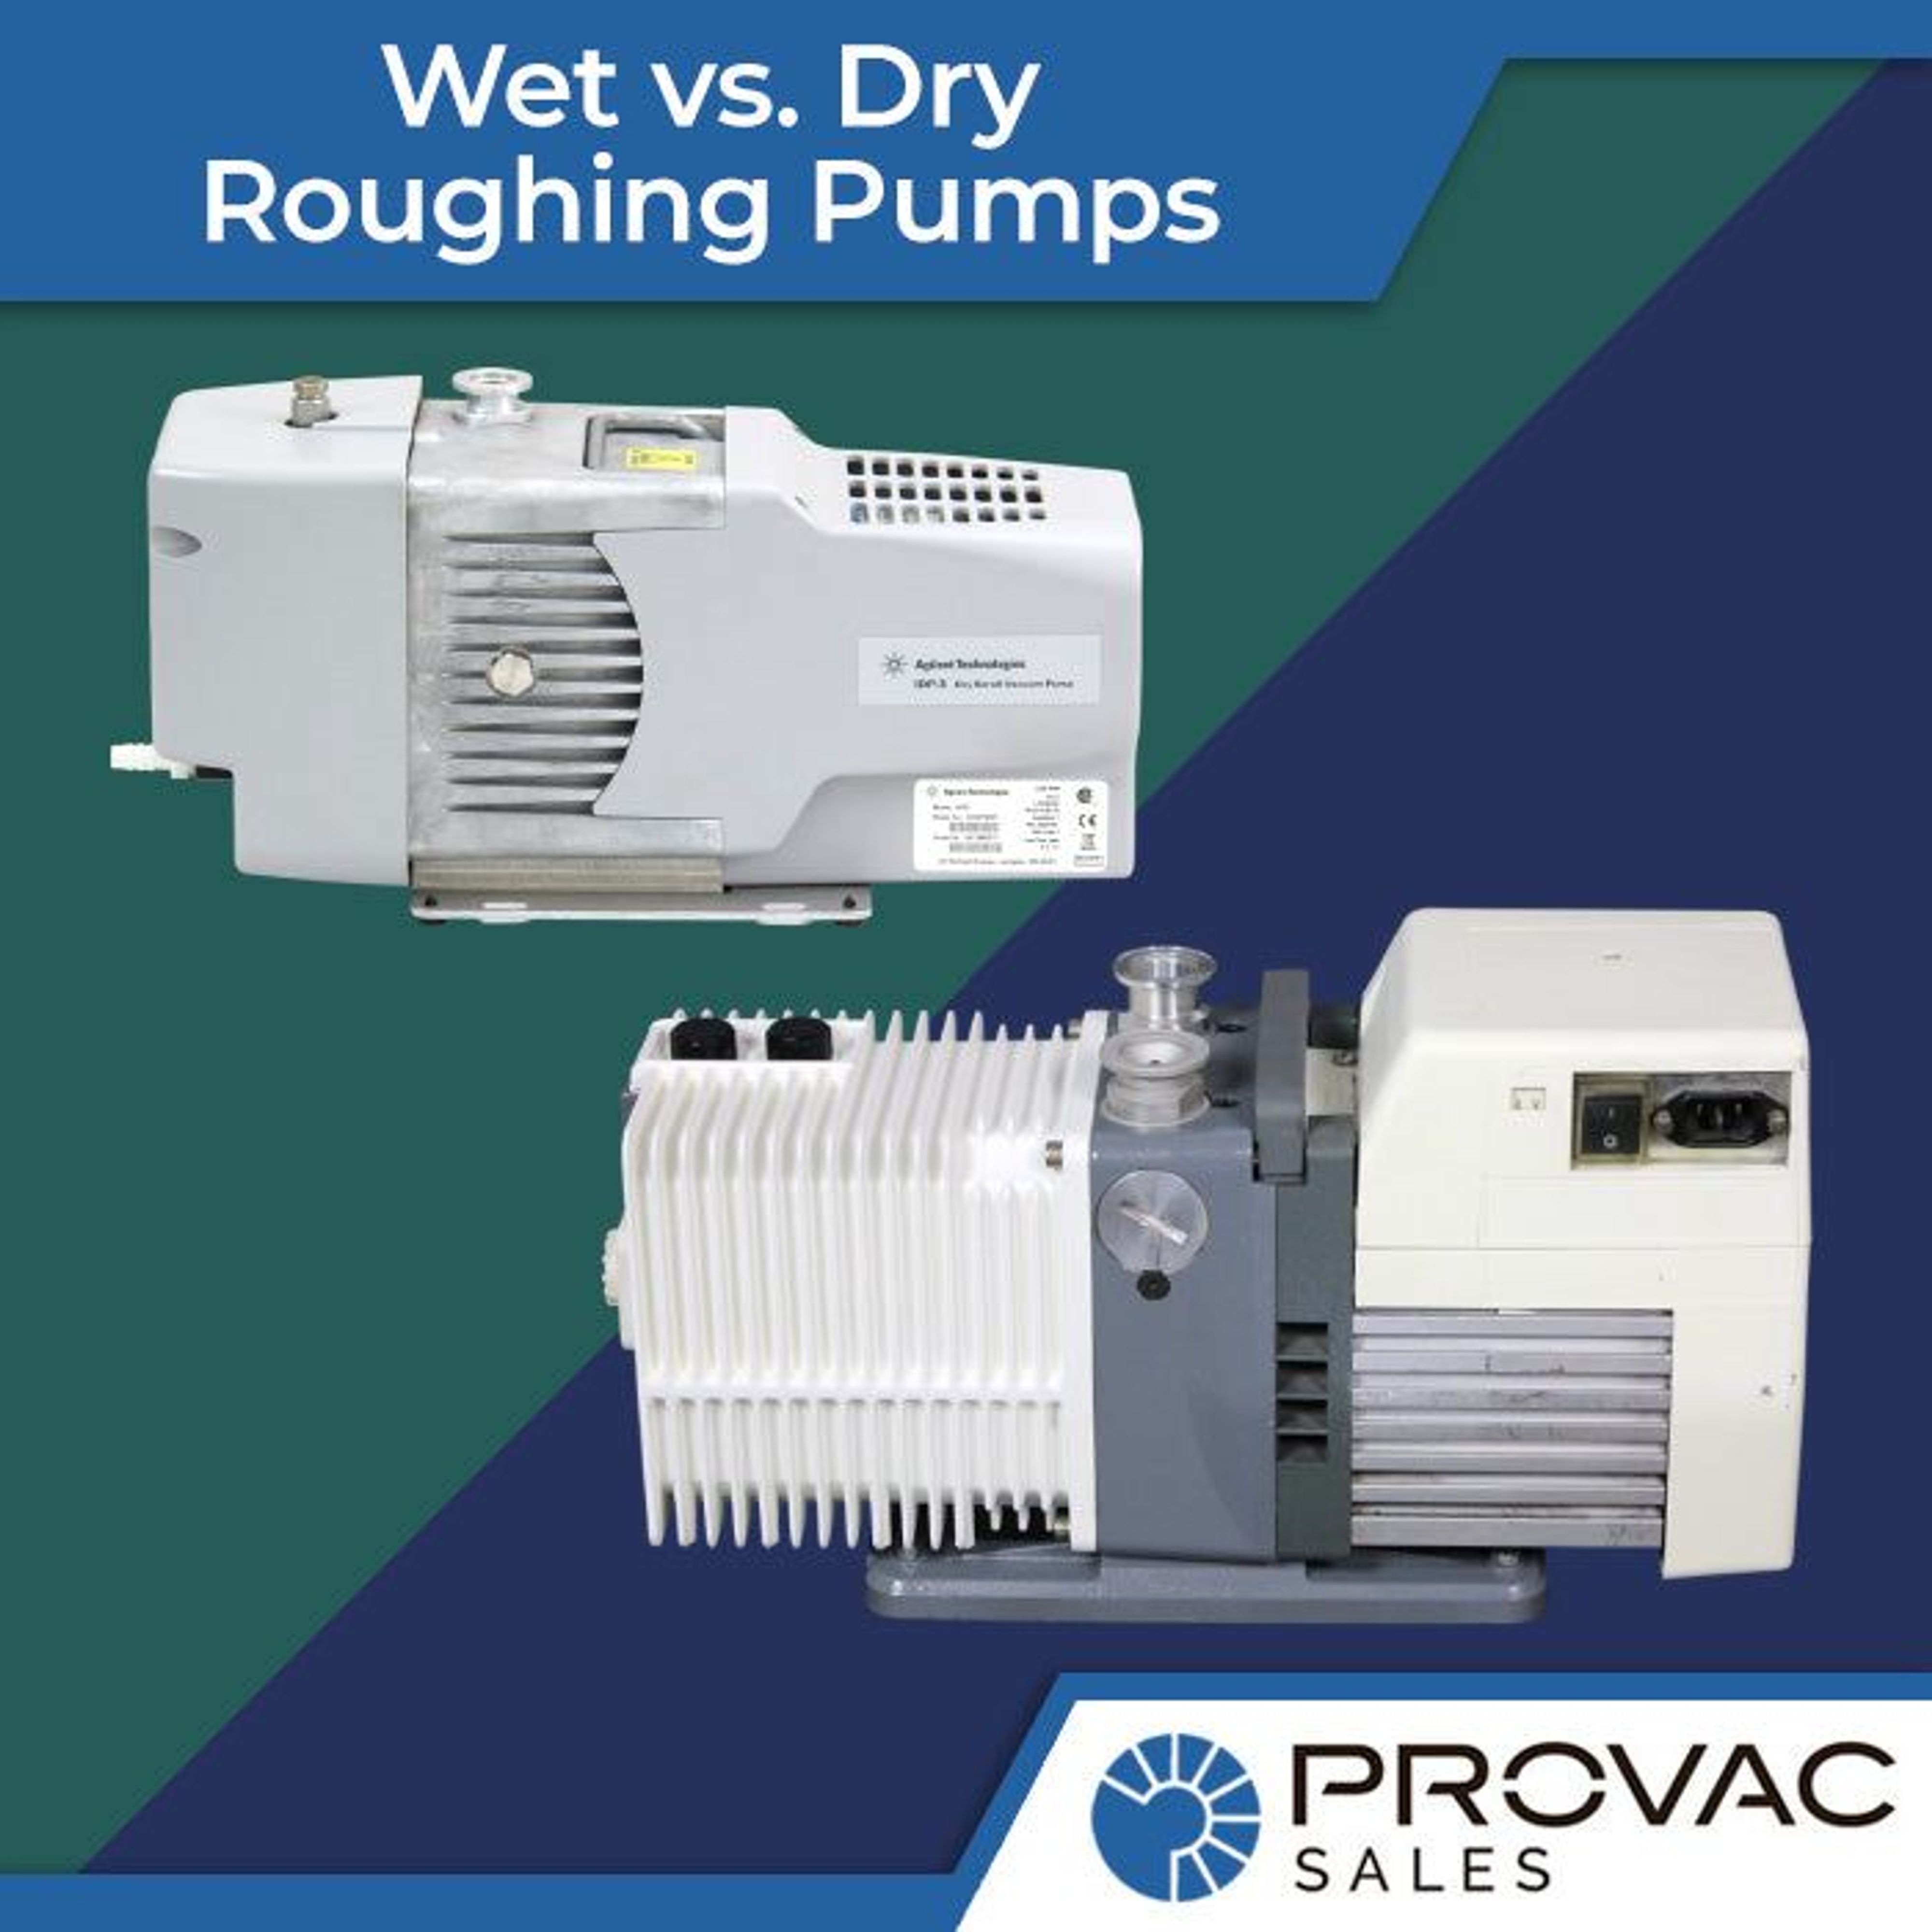 Wet vs. Dry Roughing Pumps Background